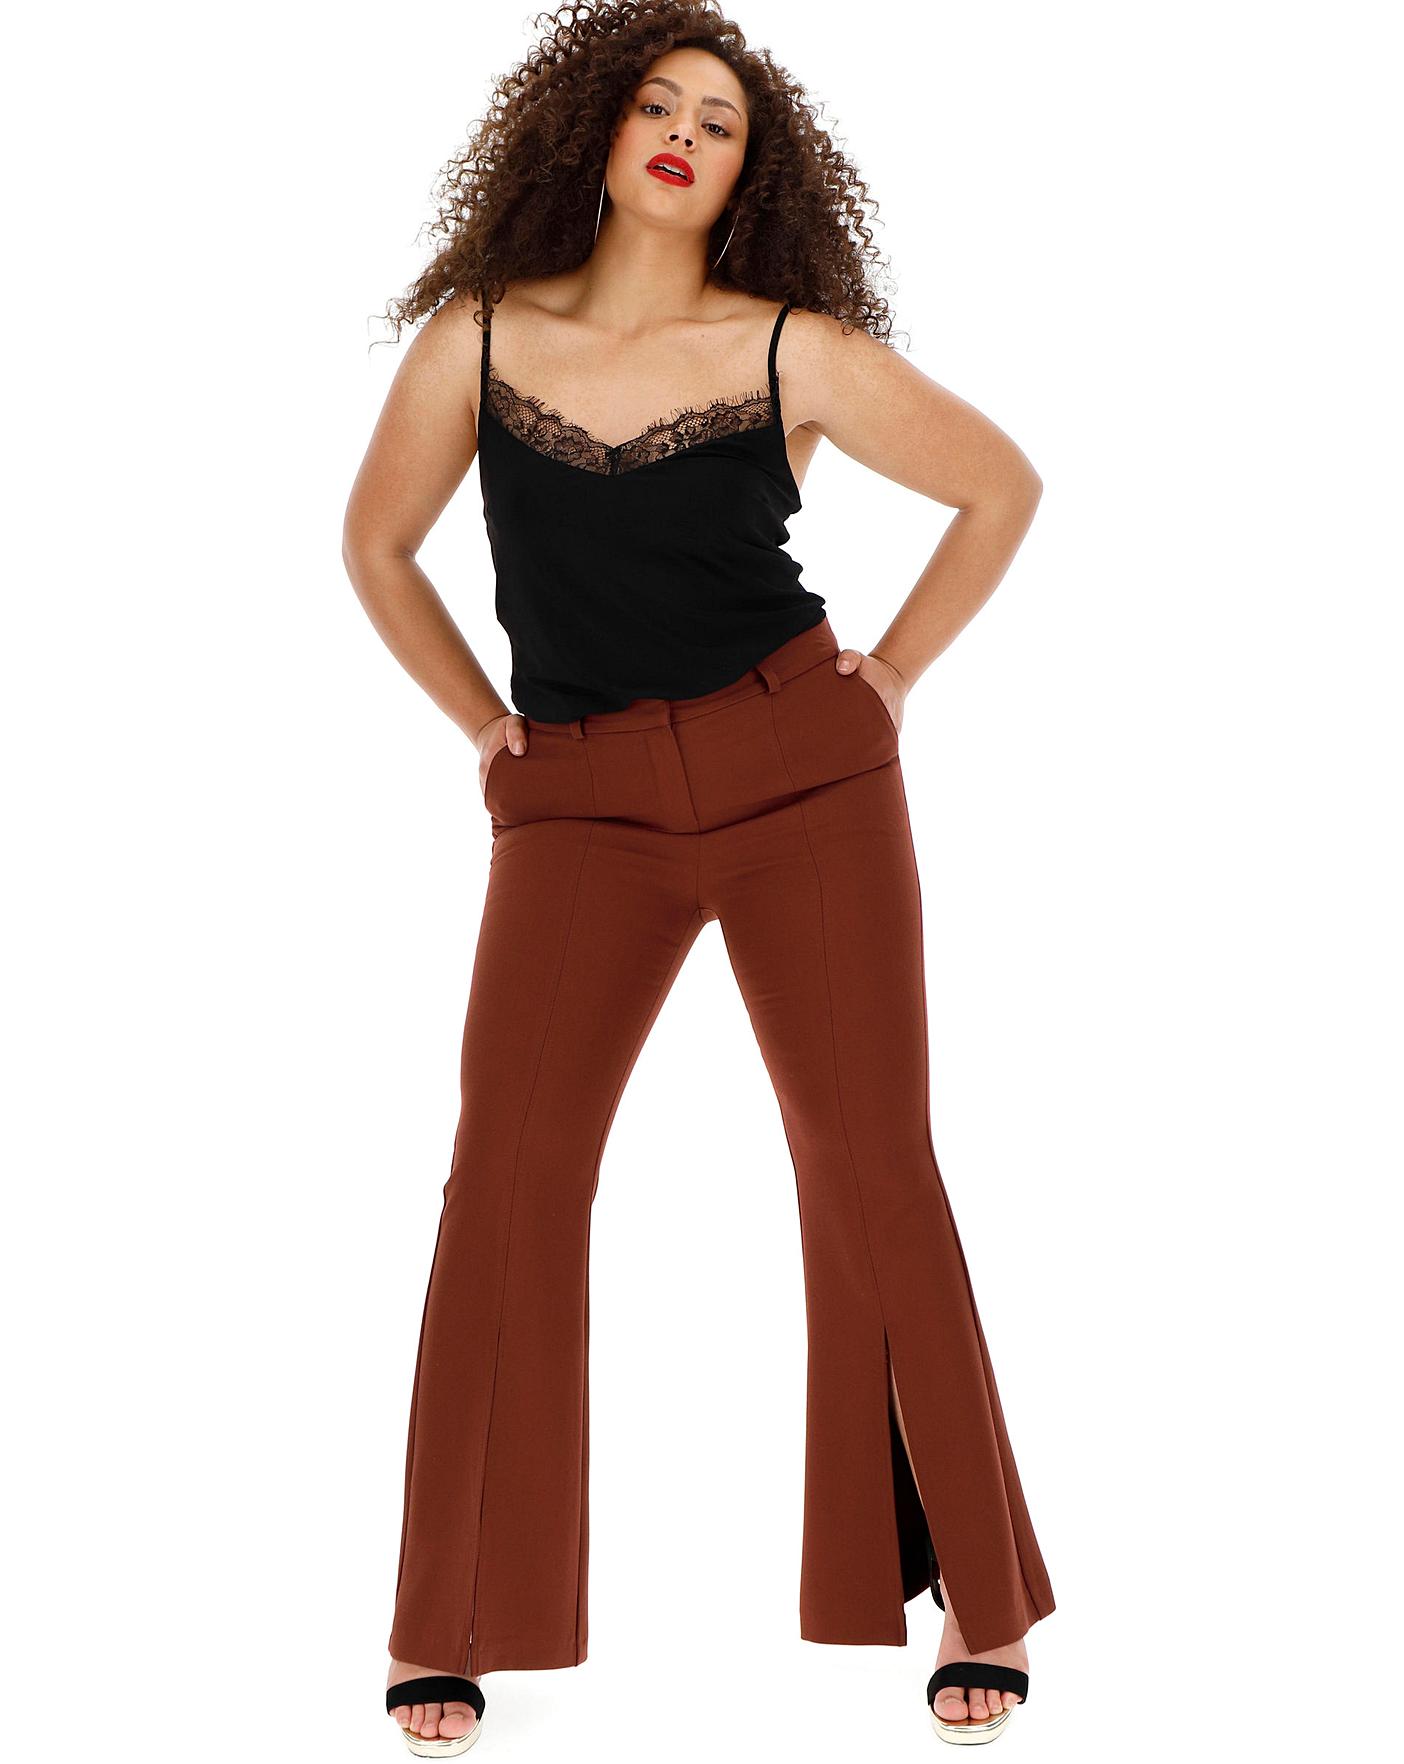 wide leg flared trousers